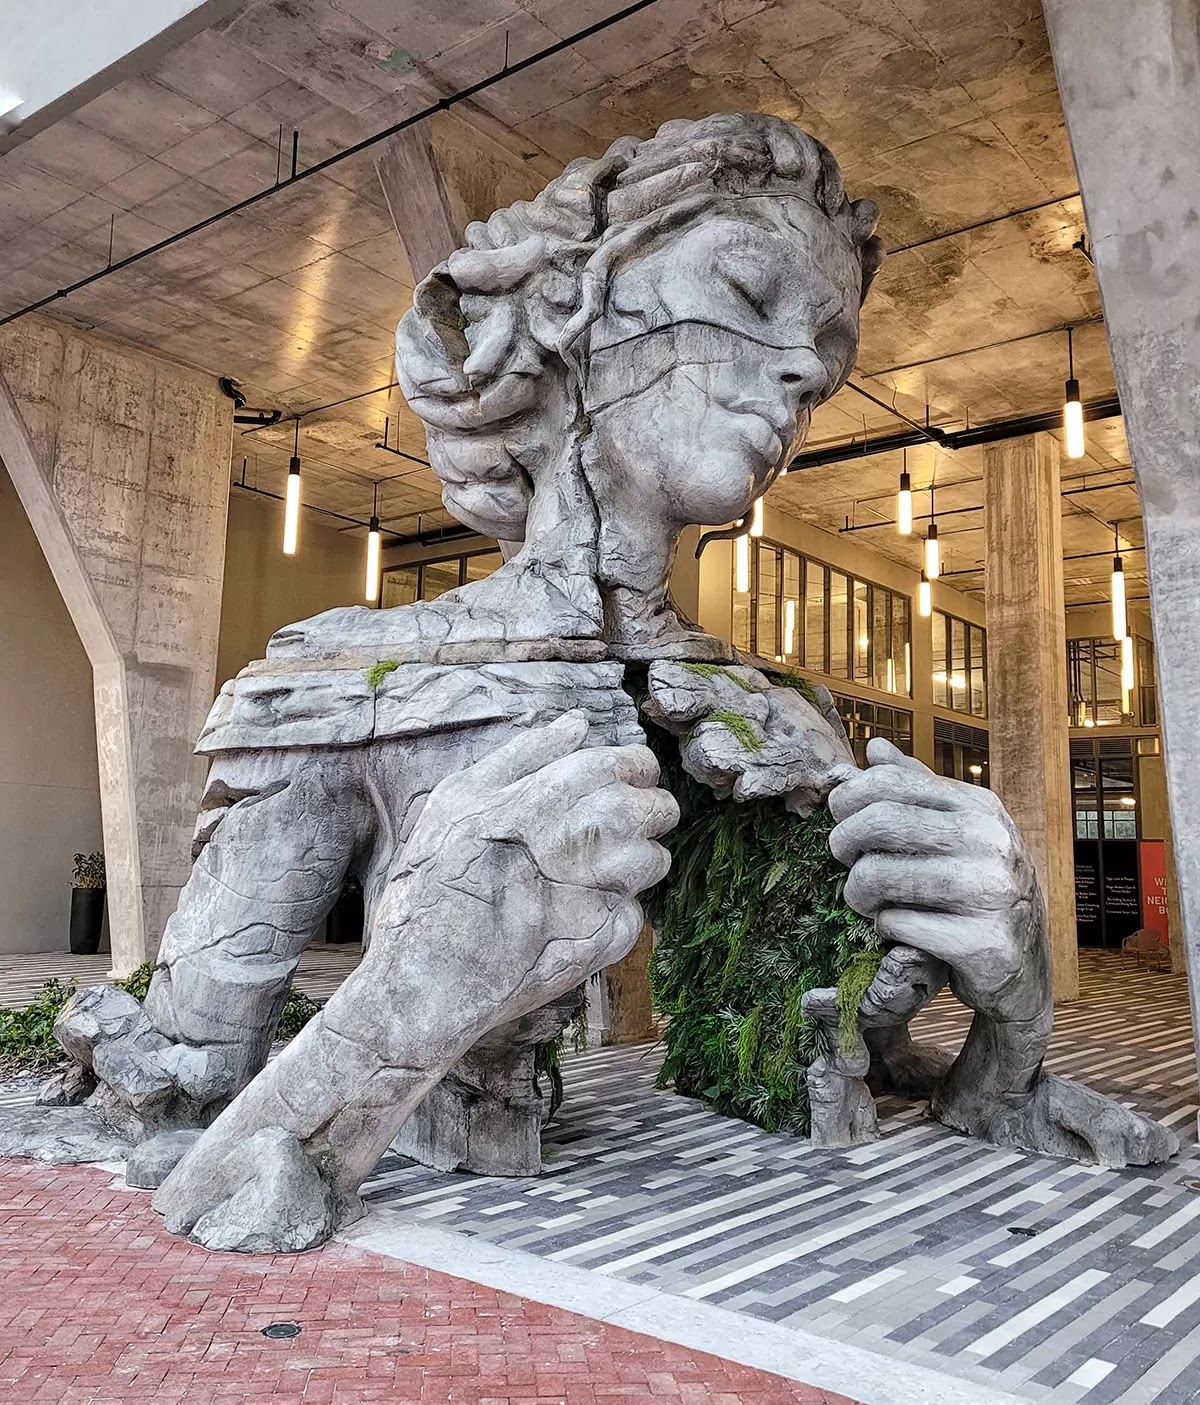 Amazing Giant Sculpture In Fort Lauderdale Stands As A Symbol Of Hope After The Year Of 2020